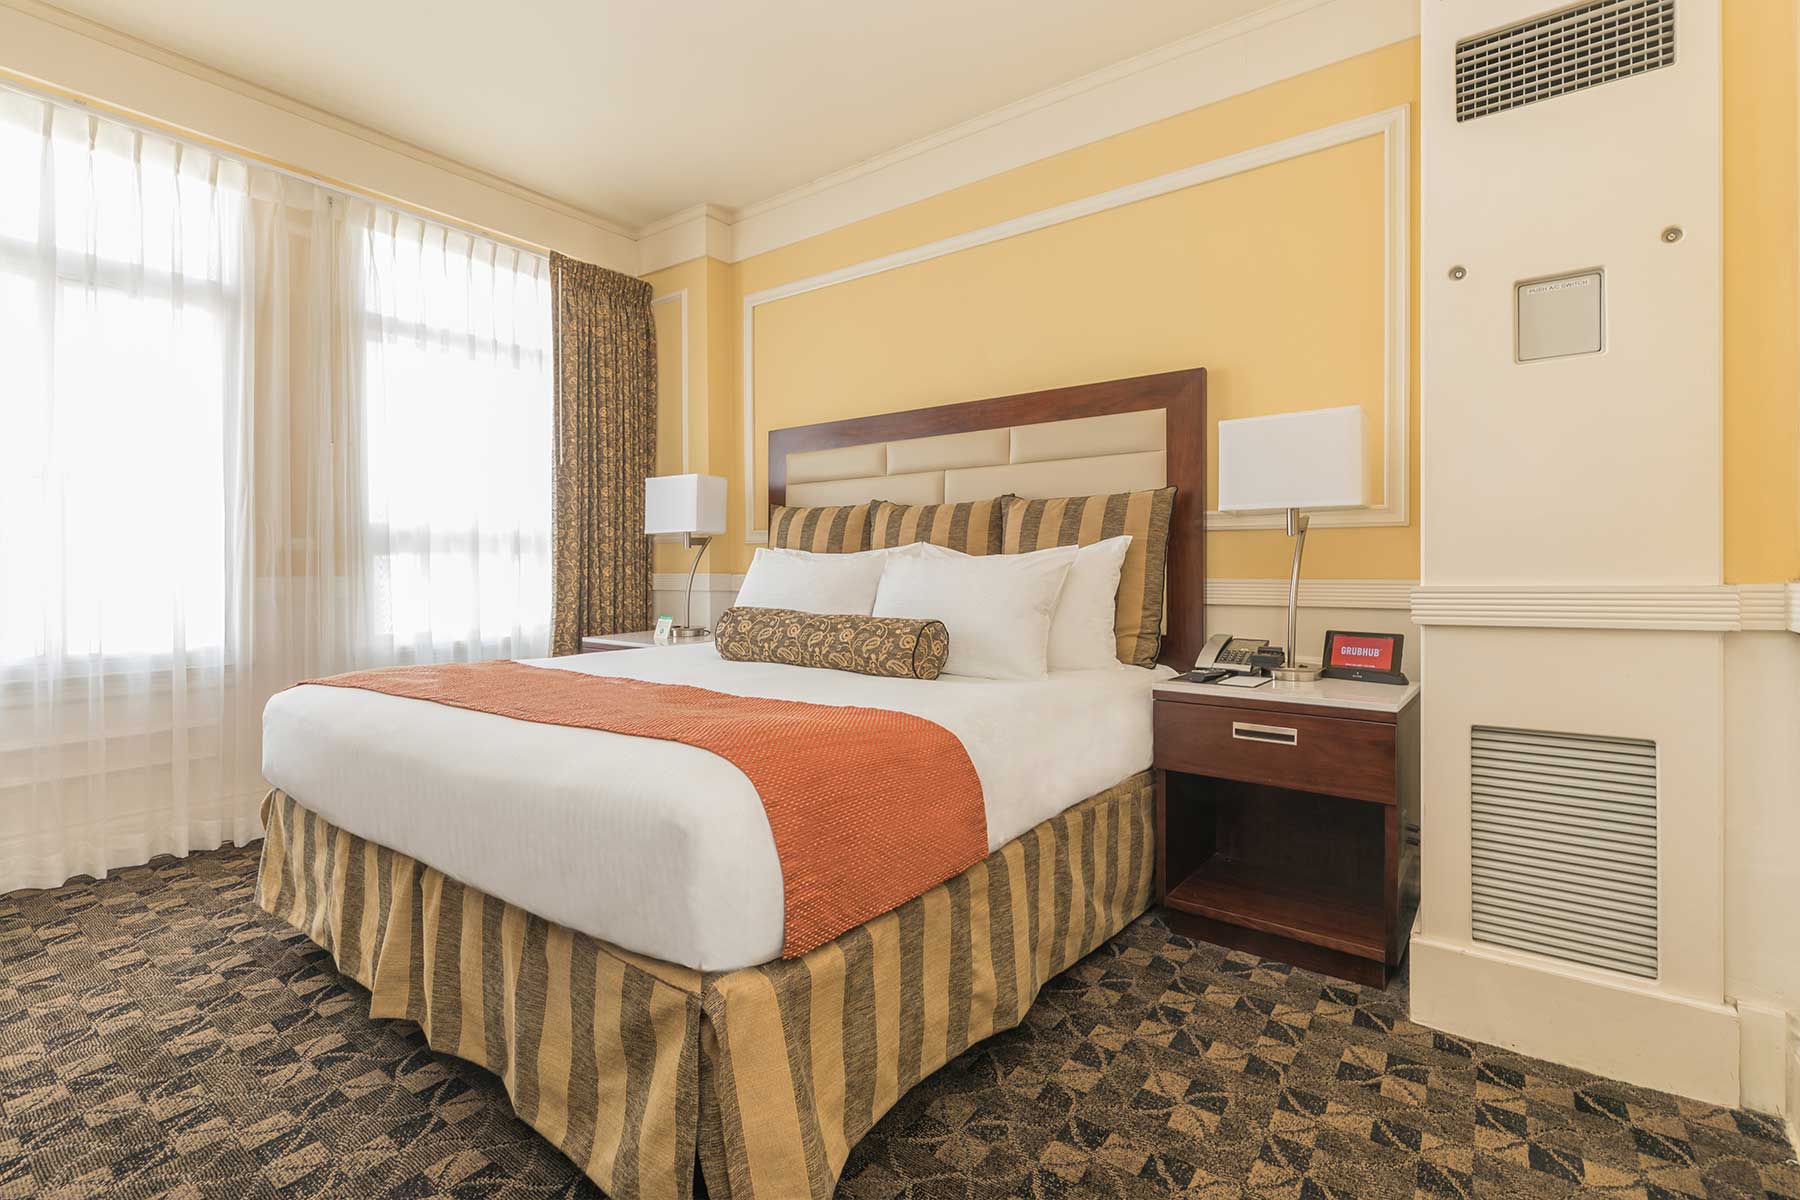 Pickwick-Hotel-Suite-Room-King-Bed